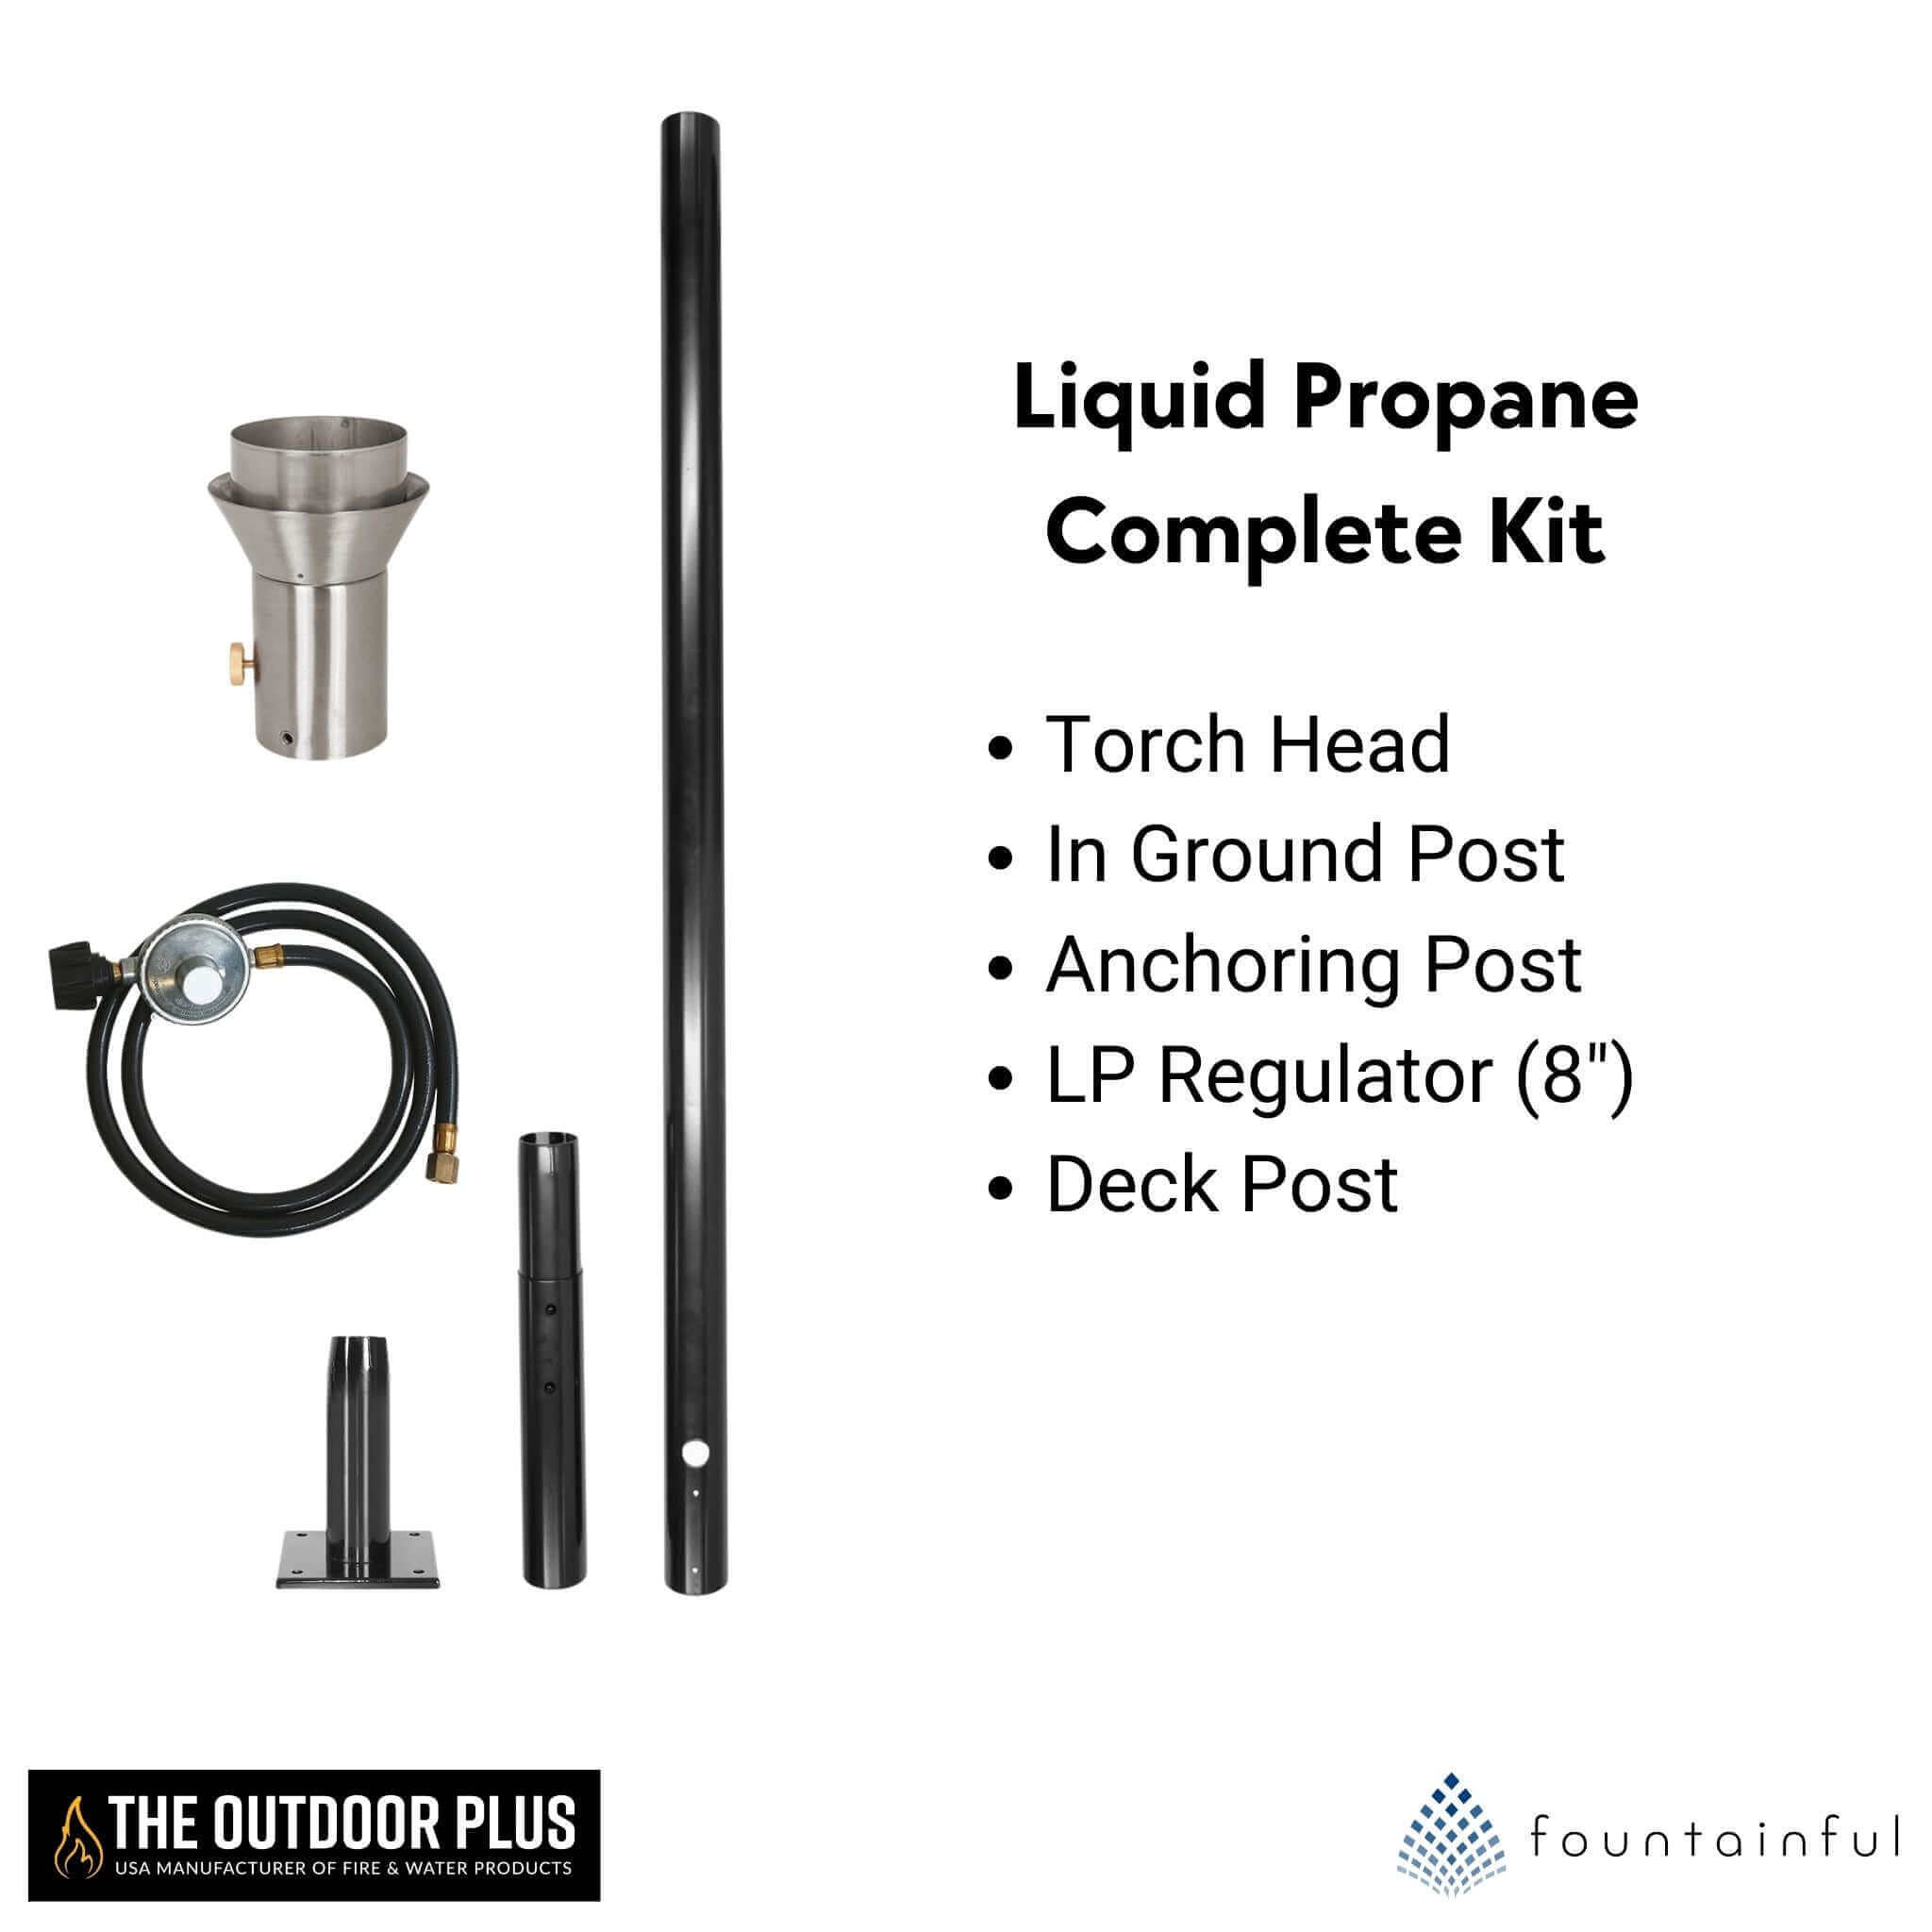 Woven Fire Torch COMPLETE KIT - Stainless Steel - The Outdoor Plus